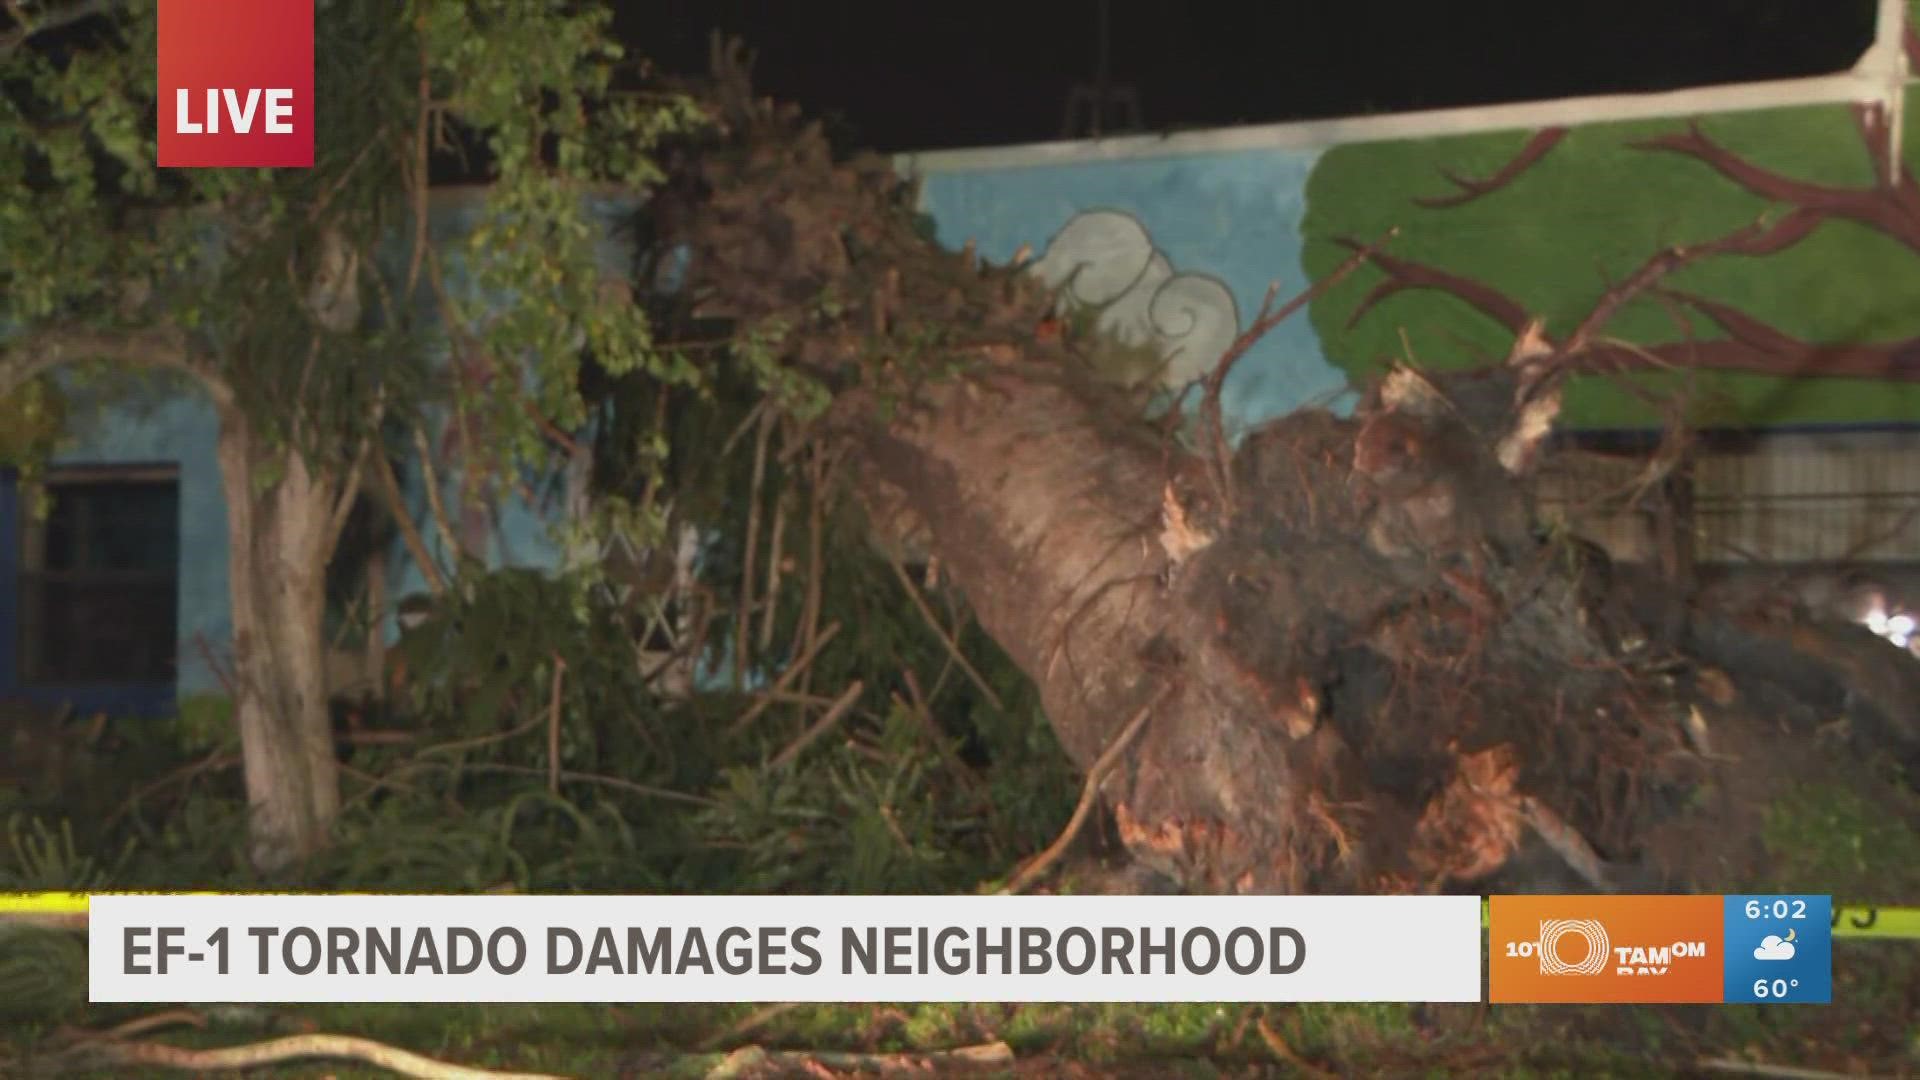 Damage was caused by an EF-1 tornado, according to the National Weather Service in Ruskin.